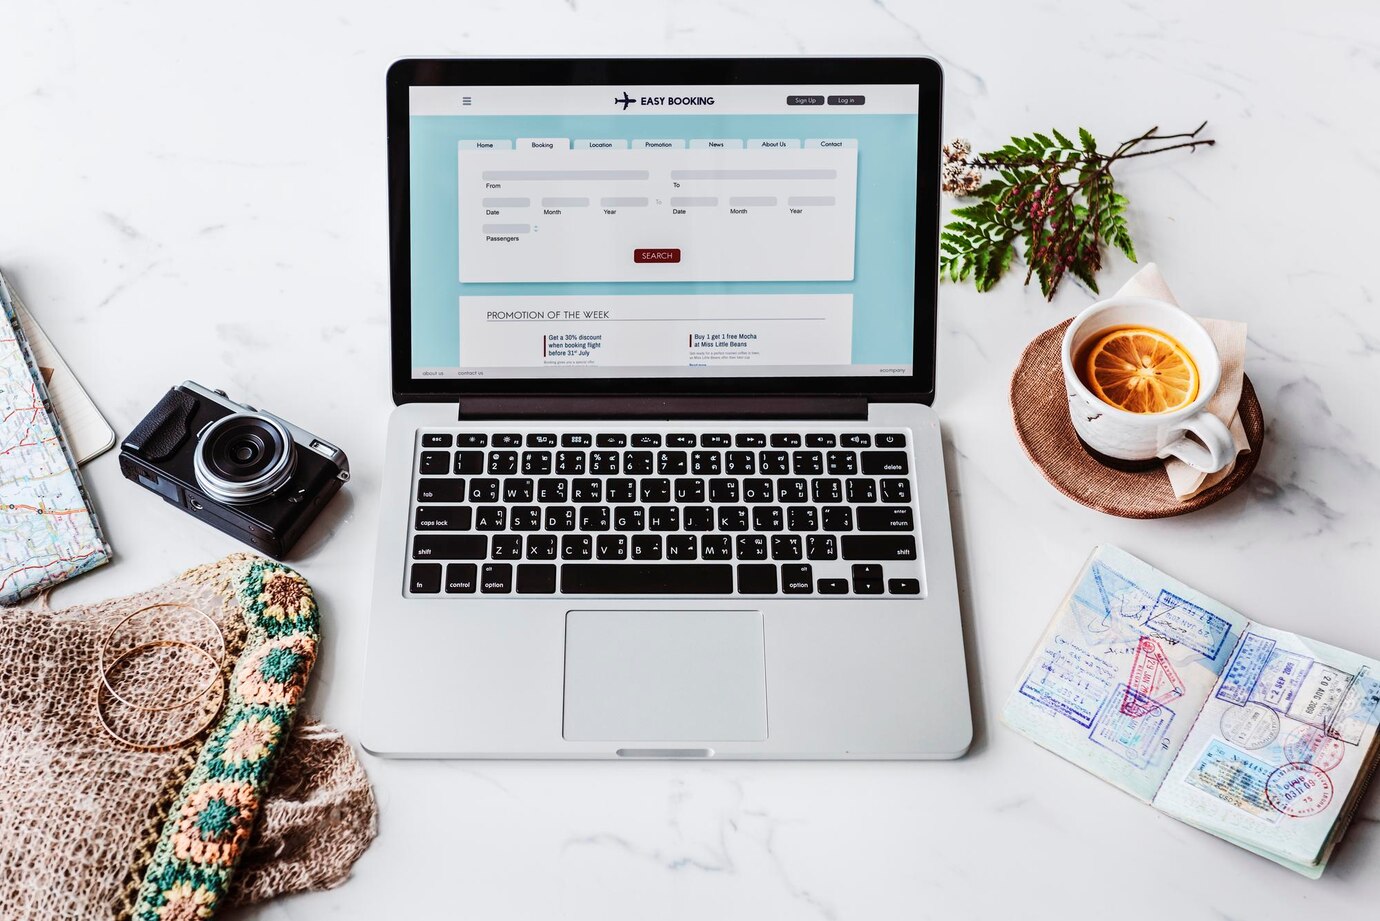 The Ultimate Guide to Online Photo Services for Travel Documents